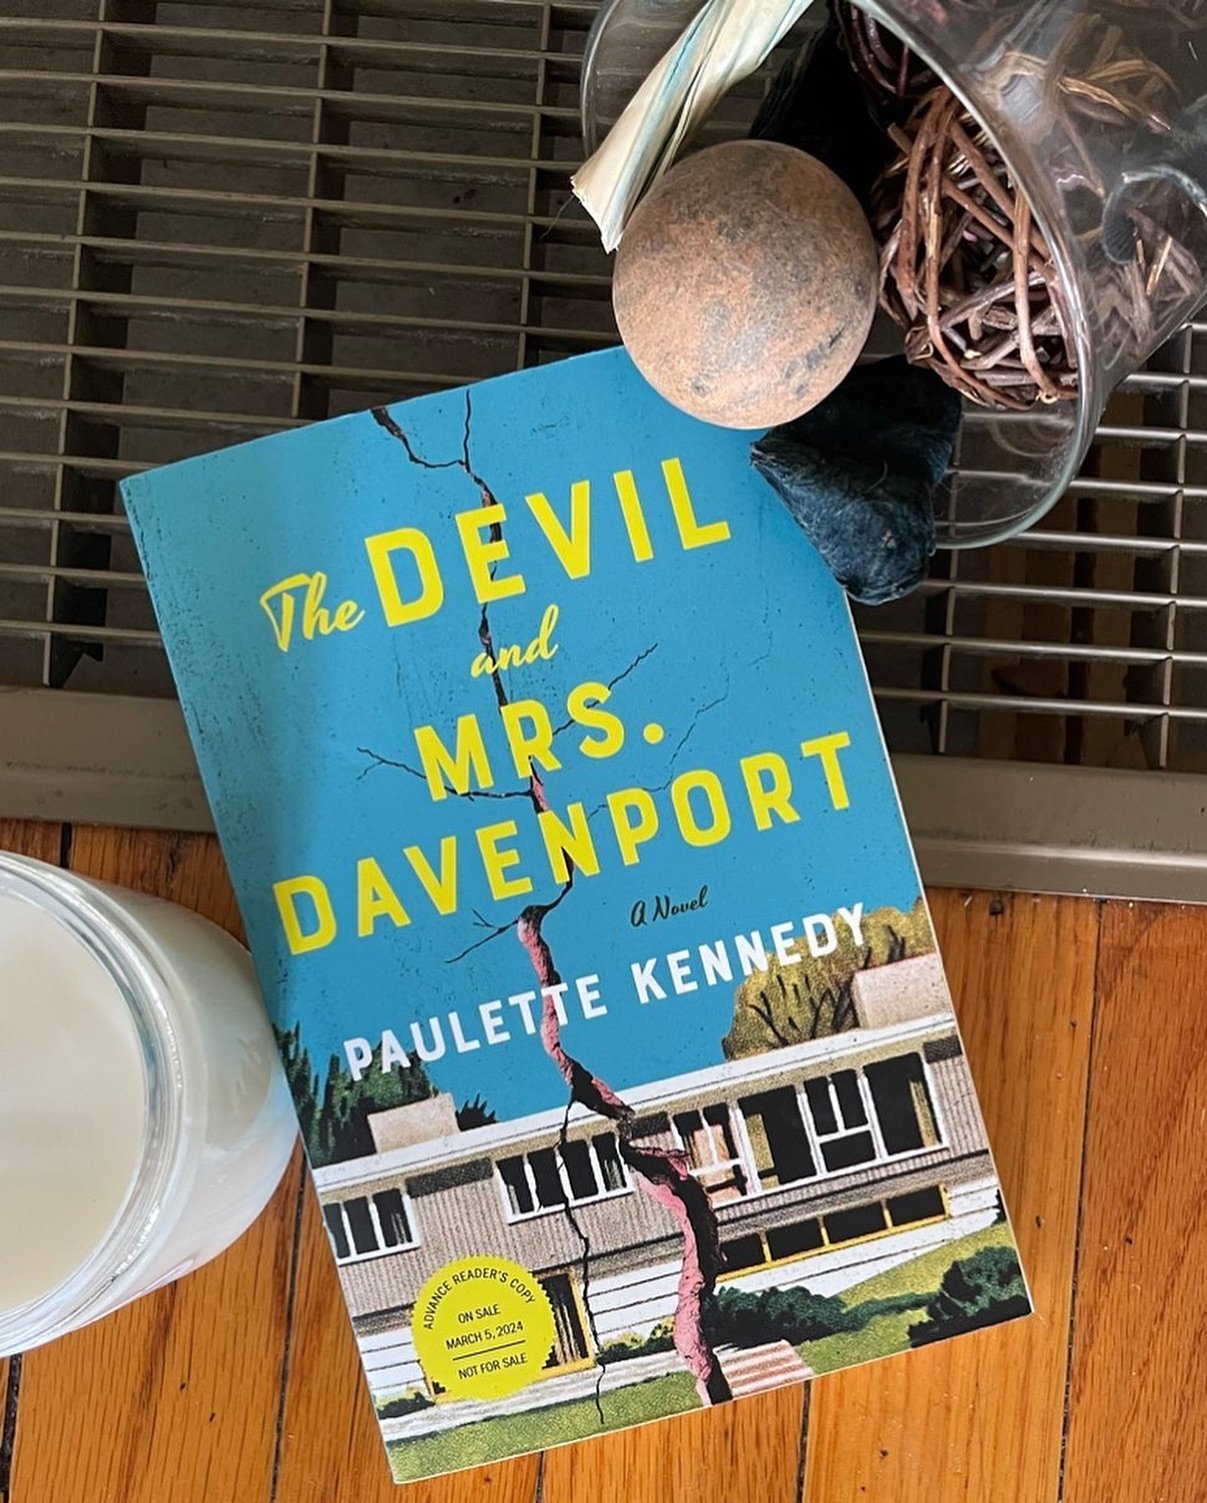 Thank you so much, Debbie! ❤️ Repost from @rozierreadsandwine
&bull;
Book Review

THE DEVIL AND MRS. DAVENPORT

By Paulette Kennedy @pkennedywrites

For @suzyapprovedbooktours

Out Now (on Kindle Unlimited)

My Take

Paulette Kennedy is one of my fav